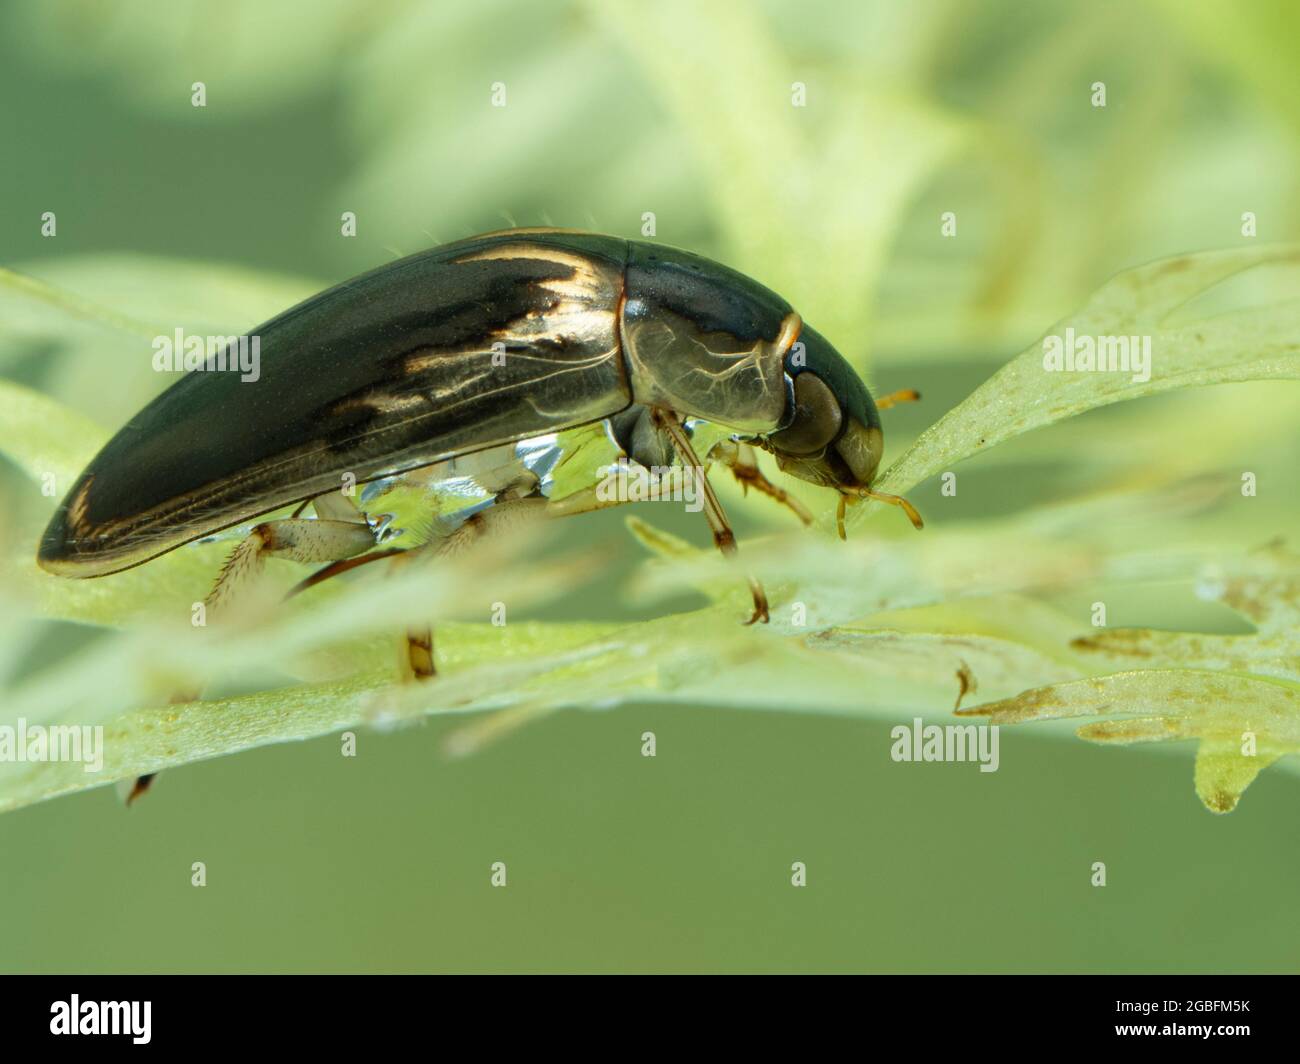 close-up of a water scavenger beetle (Tropisternus lateralis) resting on an aquatic plant, side view. Delta, British Columbia, Canada Stock Photo